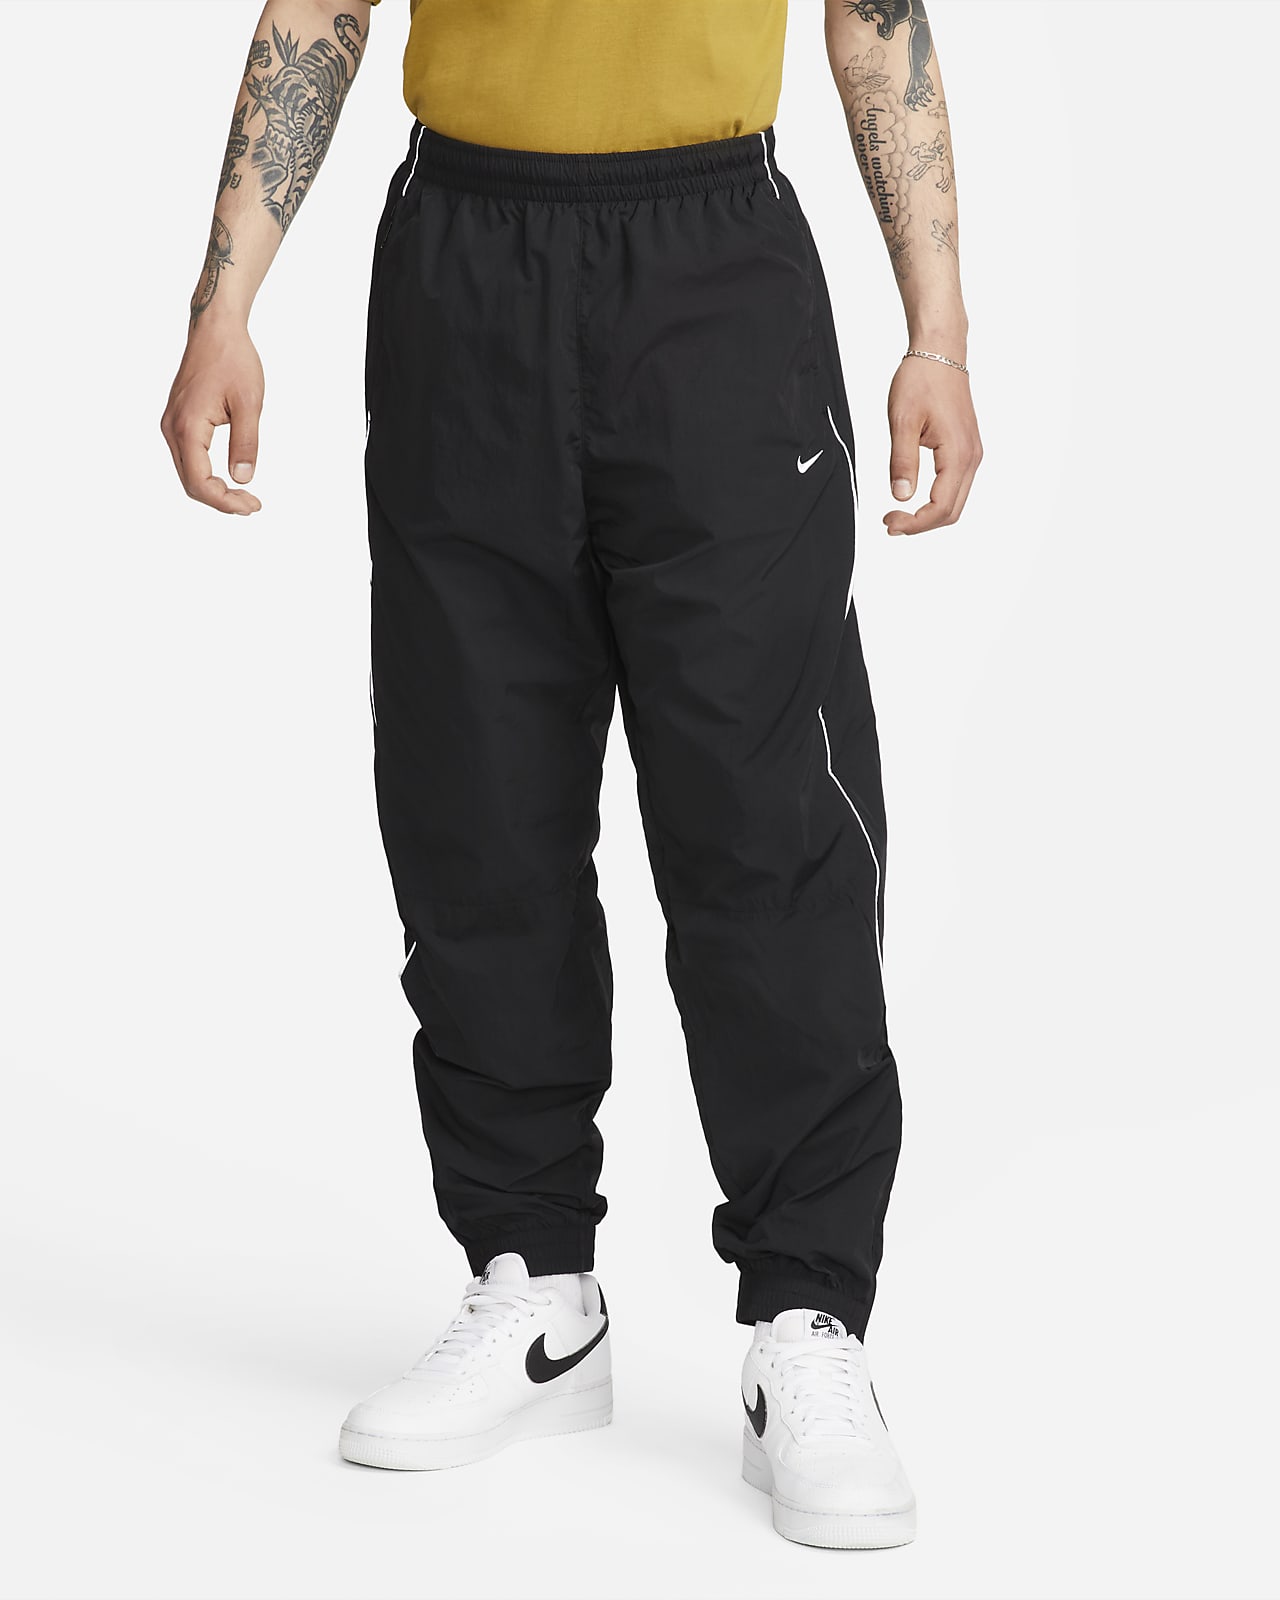 Mens Fashion Zip Pants with Side Taping Male Teen Boys Hip Hop Jogger  Patchwork Sport Sweatpants Track Pants Trousers - Walmart.com